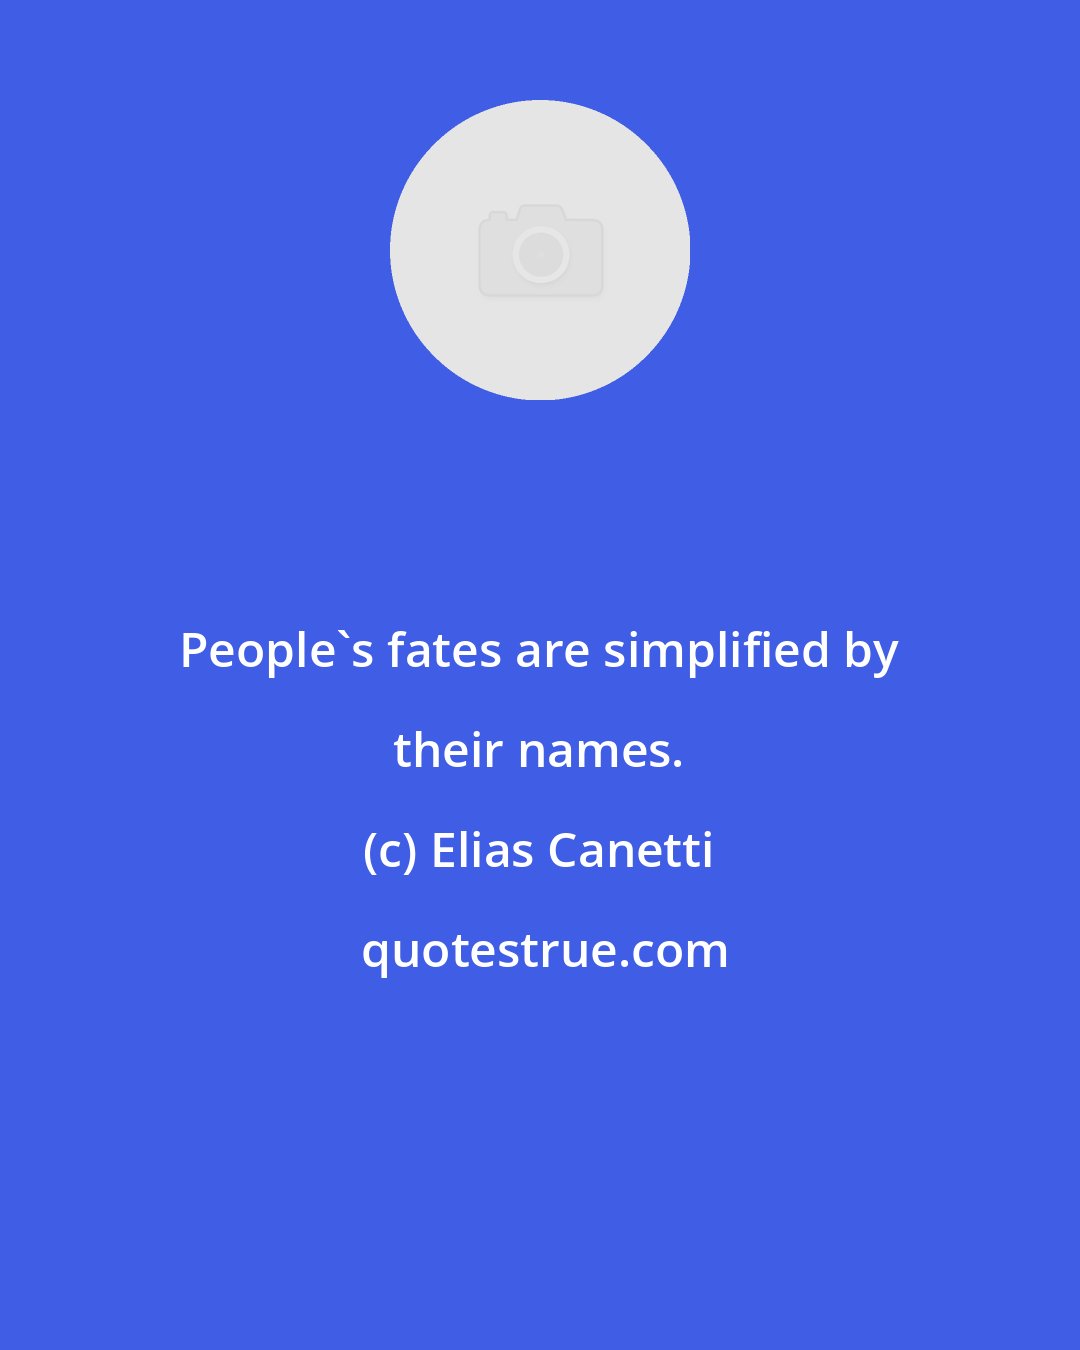 Elias Canetti: People's fates are simplified by their names.